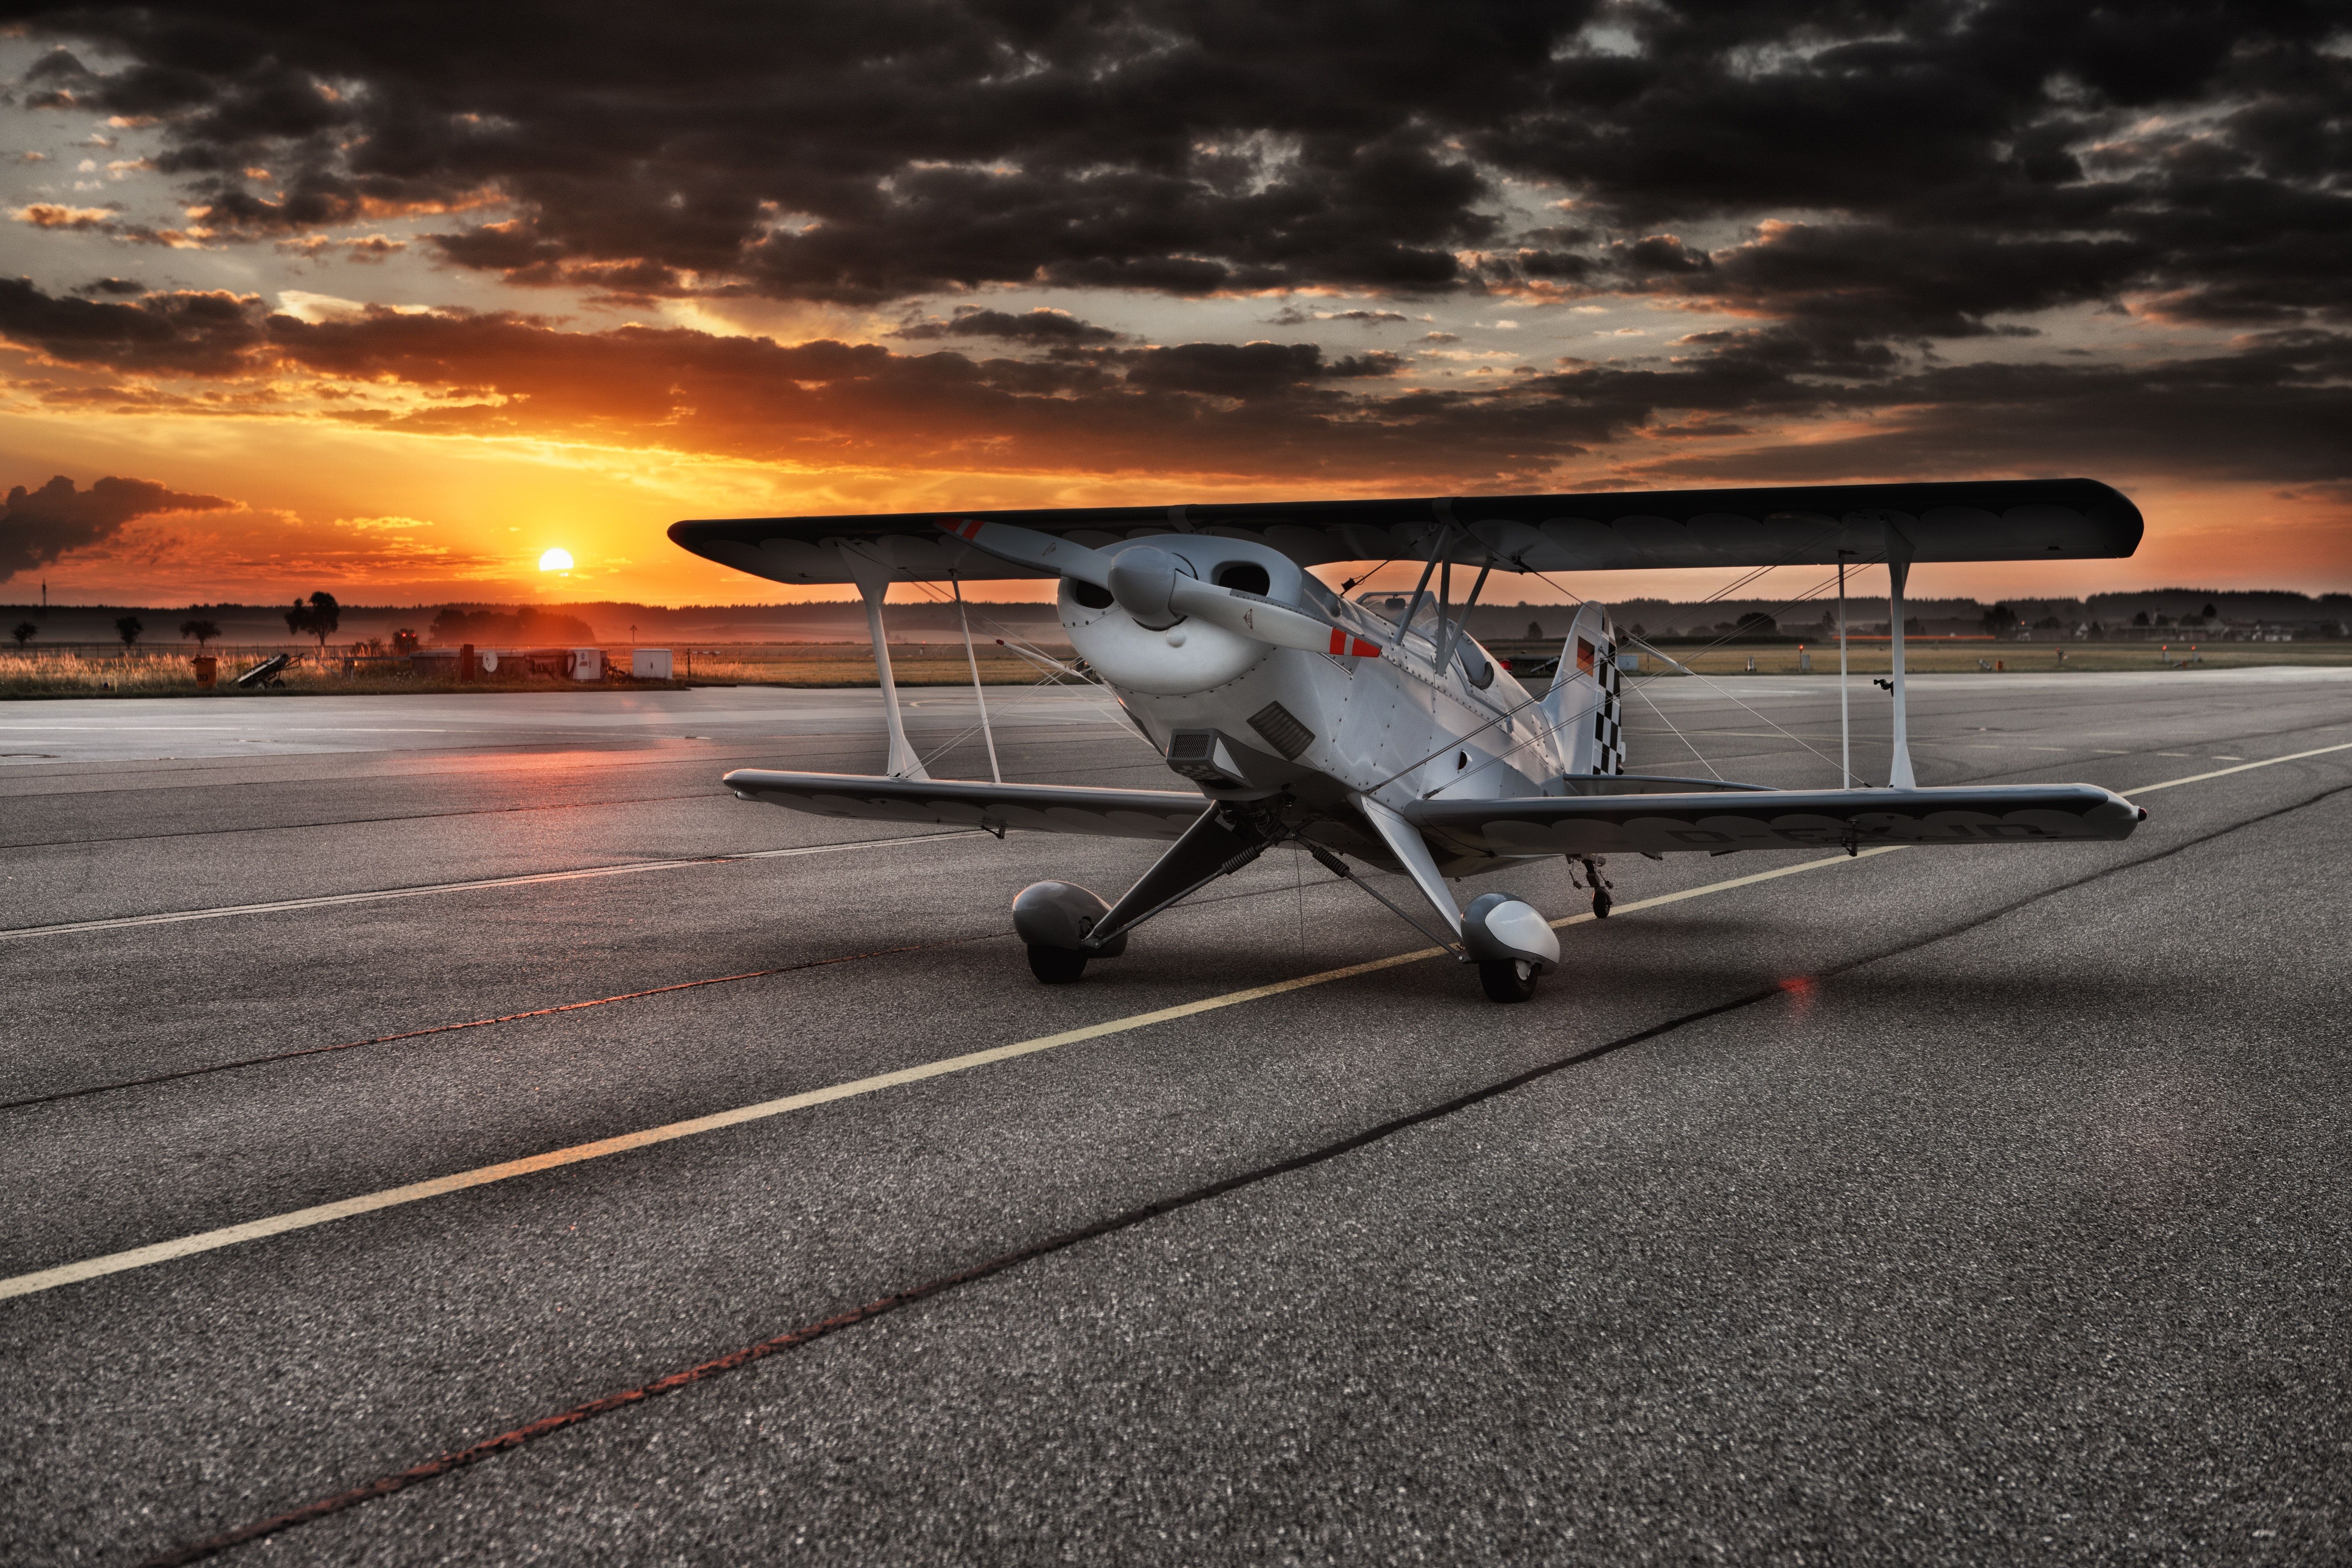 A biplane sits on the runway as the sun sets behind it. - Airplane